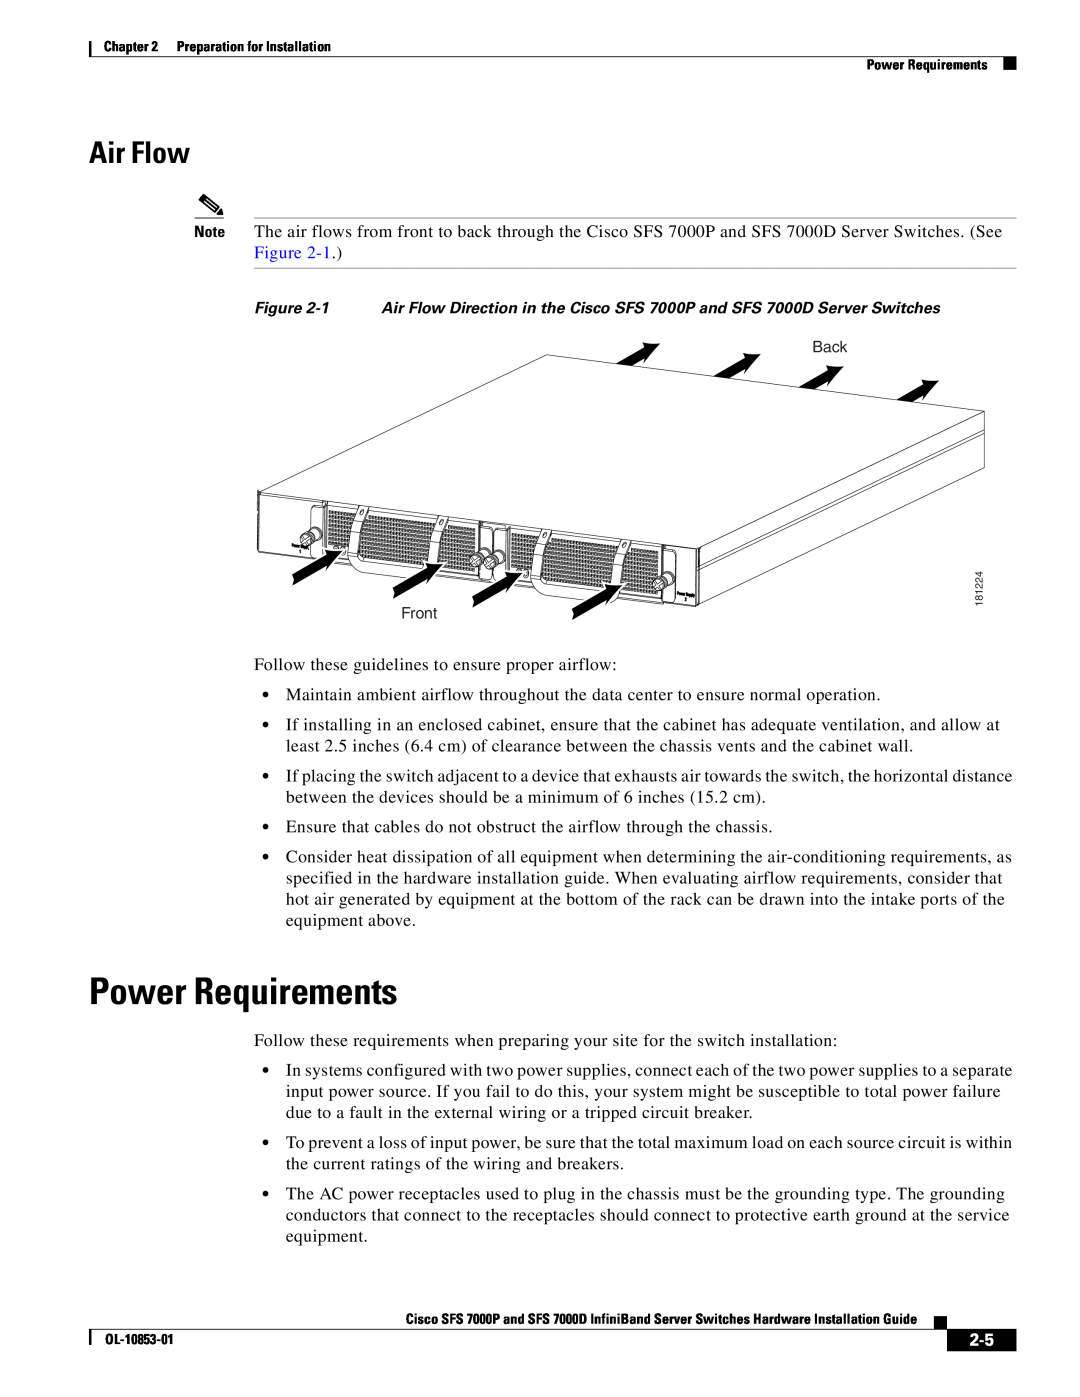 Cisco Systems SFS 7000D, SFS 7000P manual Power Requirements, Air Flow 